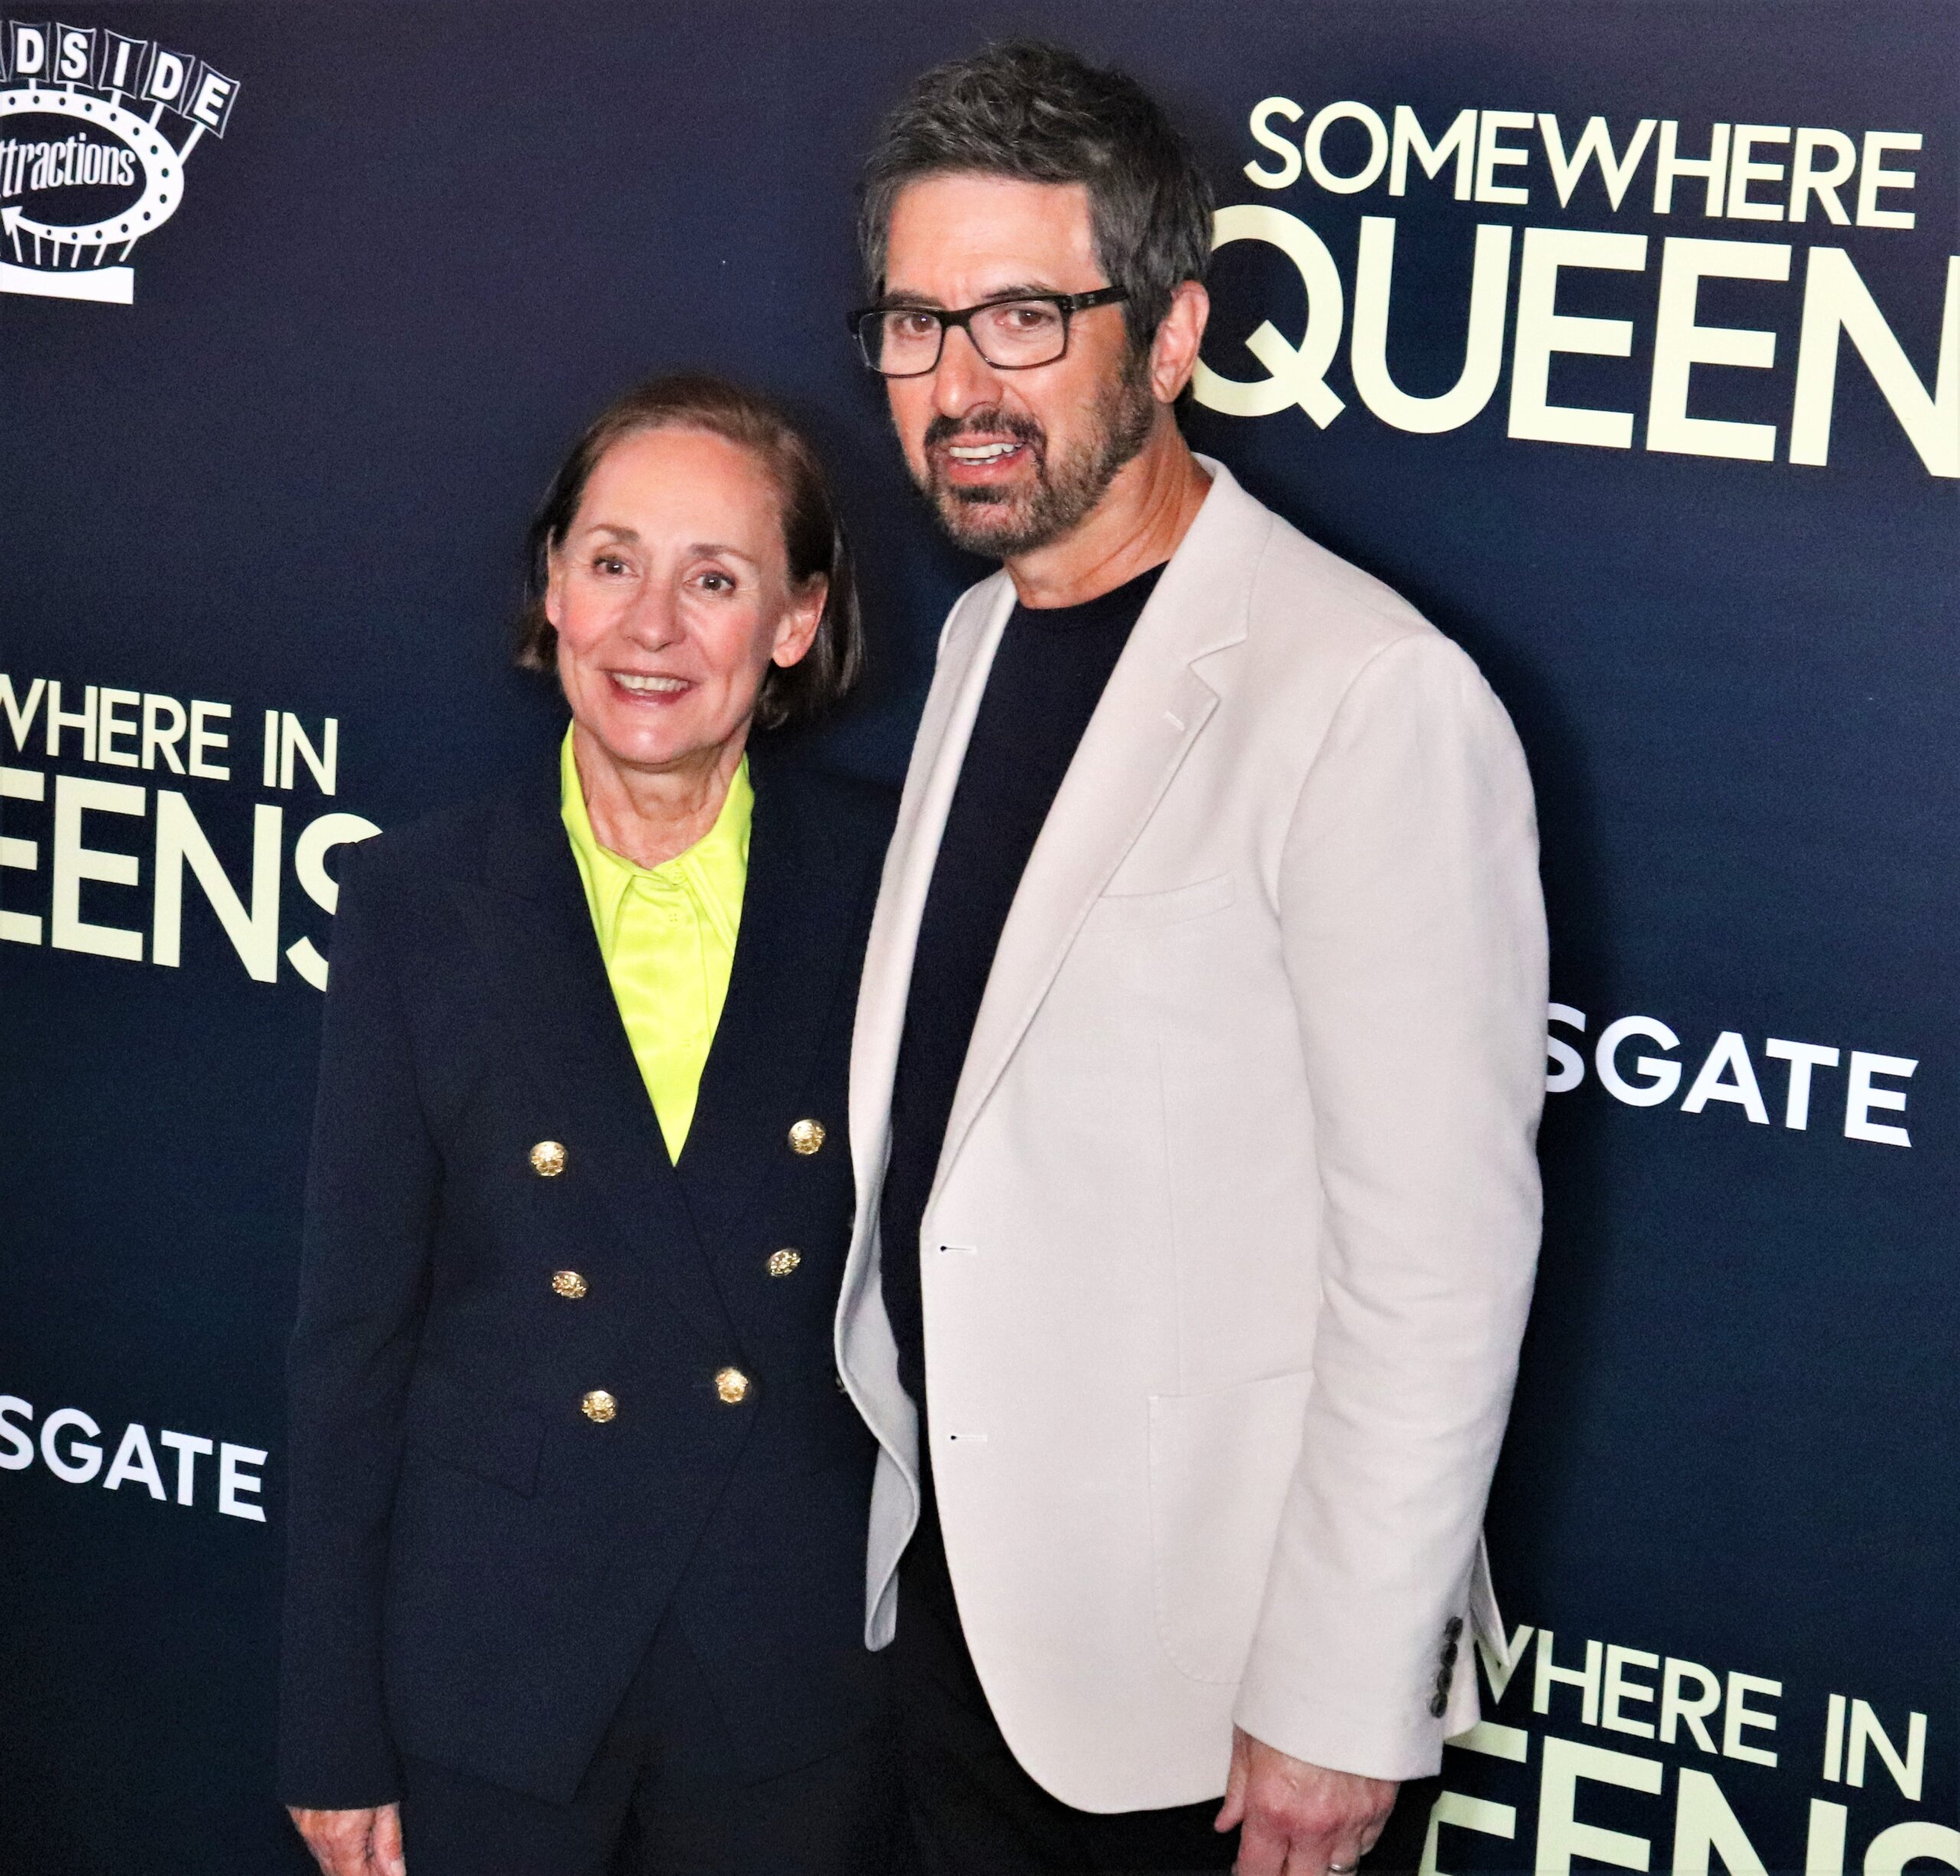 Laurie Metcalf, who plays Angela Russo (L) and Ray Romano (R) who plays Leo Russo in Somewhere in Queens (Photo by Michael Dorgan)